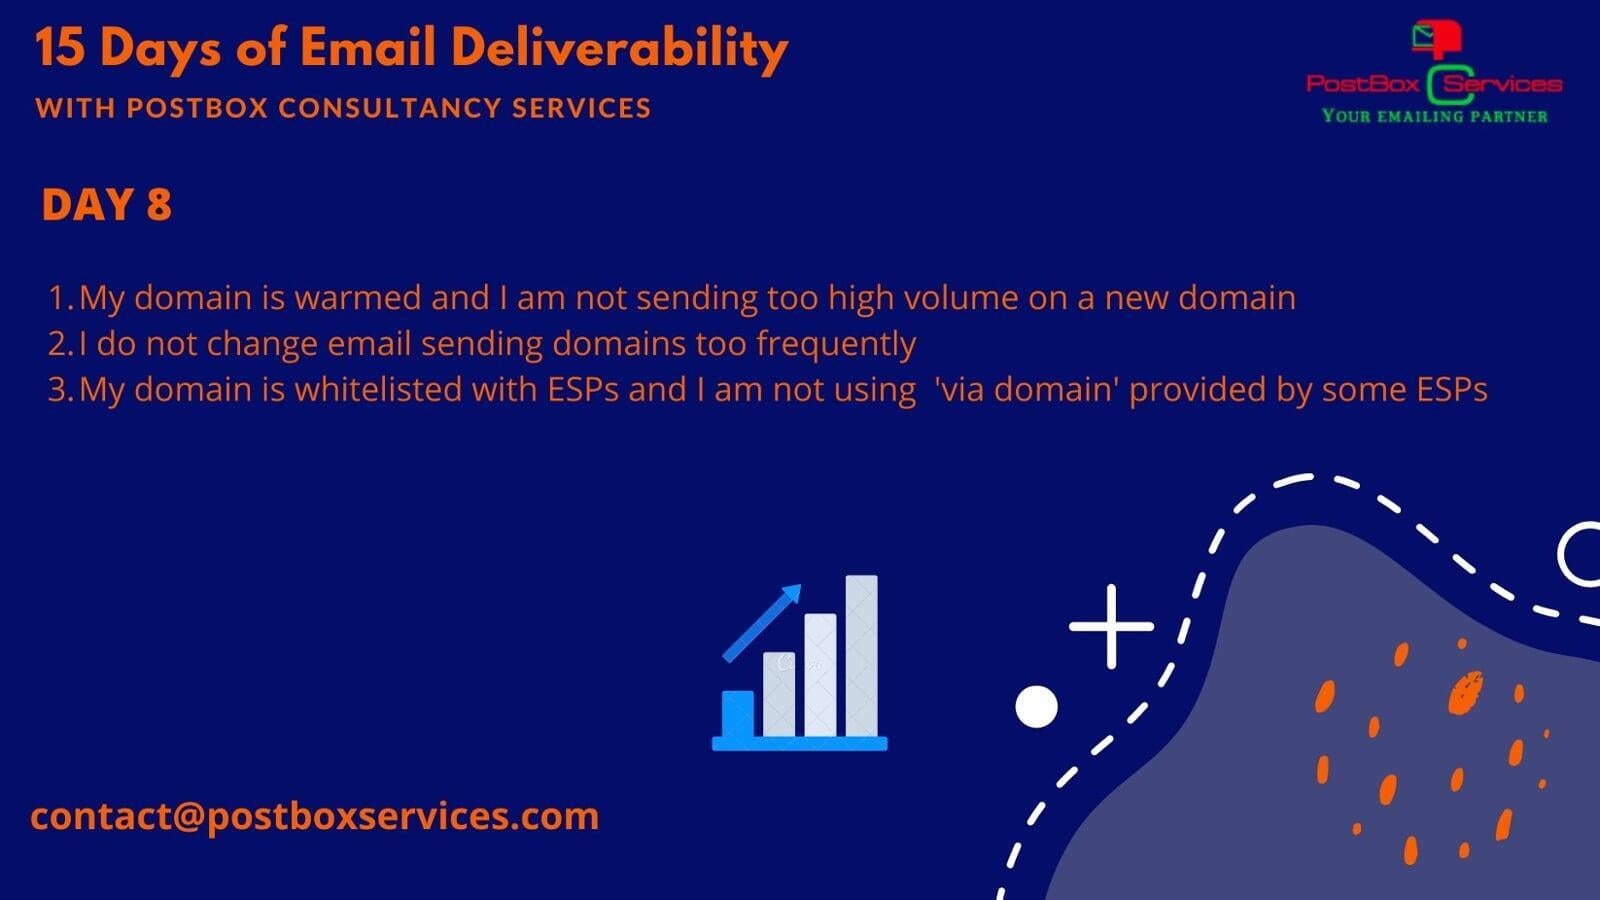 Day 8 Email Deliverability